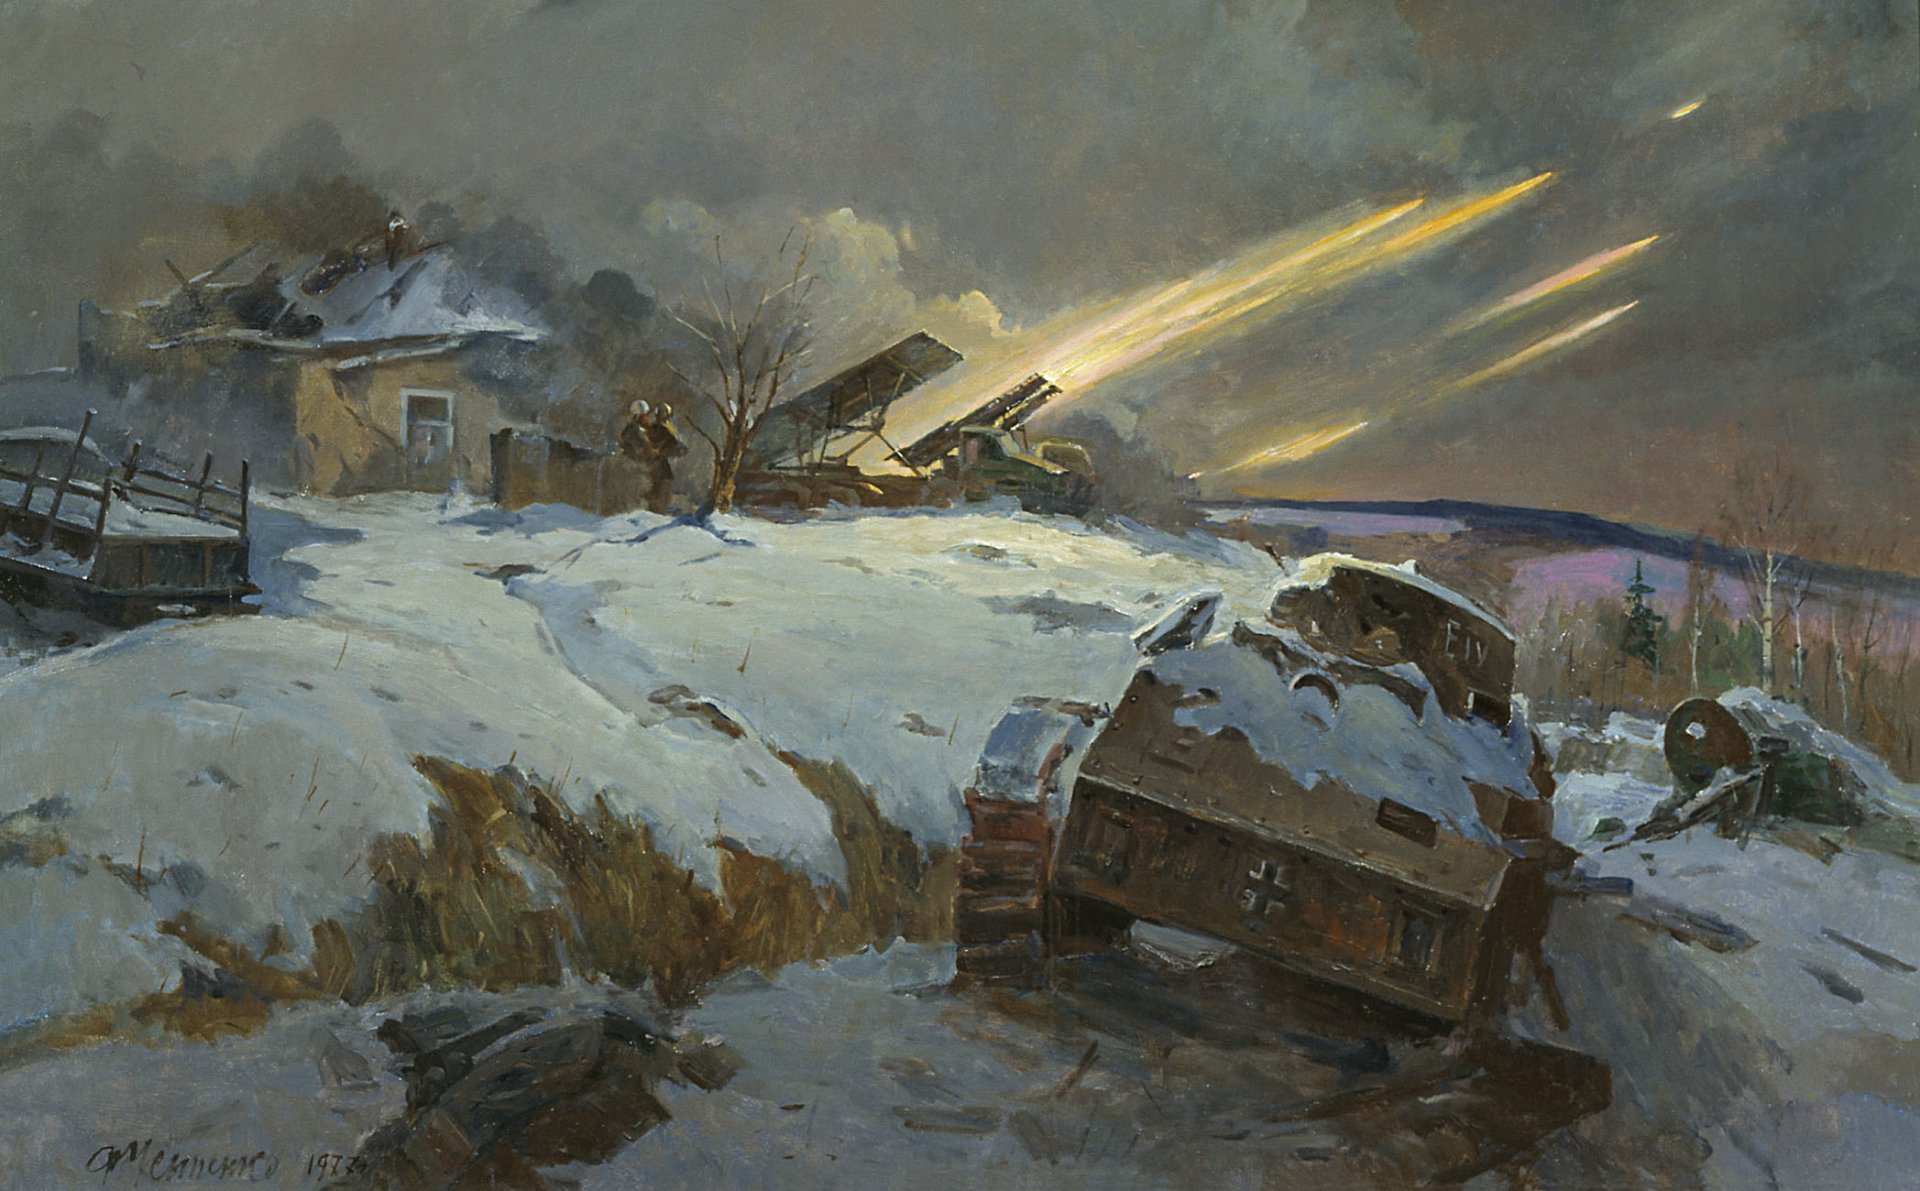 Red Army Stalingrad World War Ii War Military Winter Cold Ice Snow Artwork Military Vehicle Vehicle  1920x1191